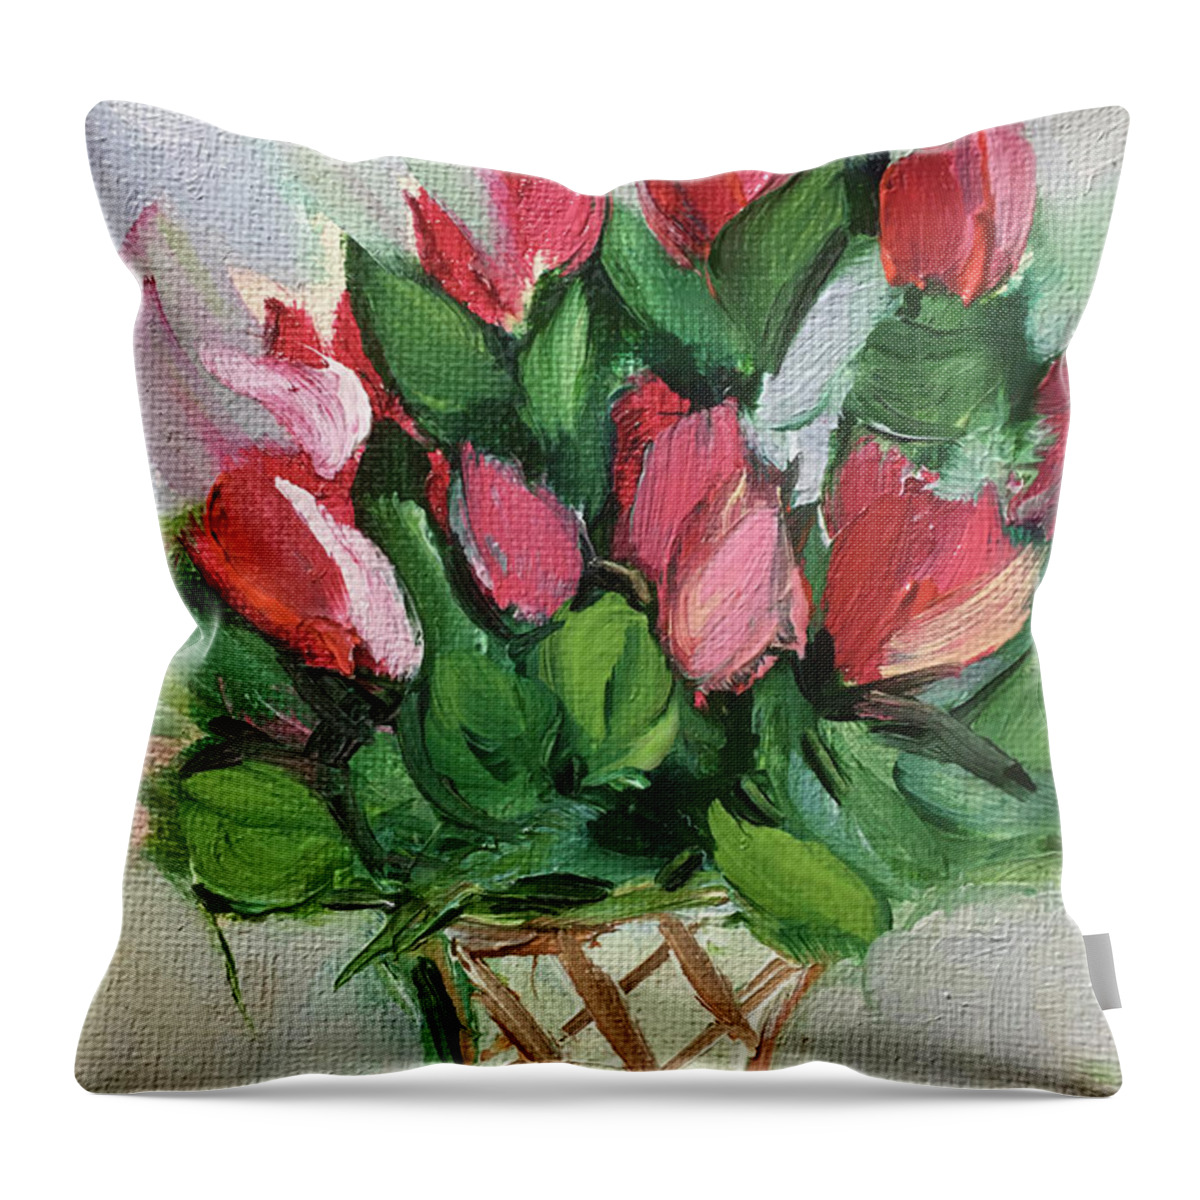 Flowers Throw Pillow featuring the painting Red Flowers in a White Basket by Roxy Rich